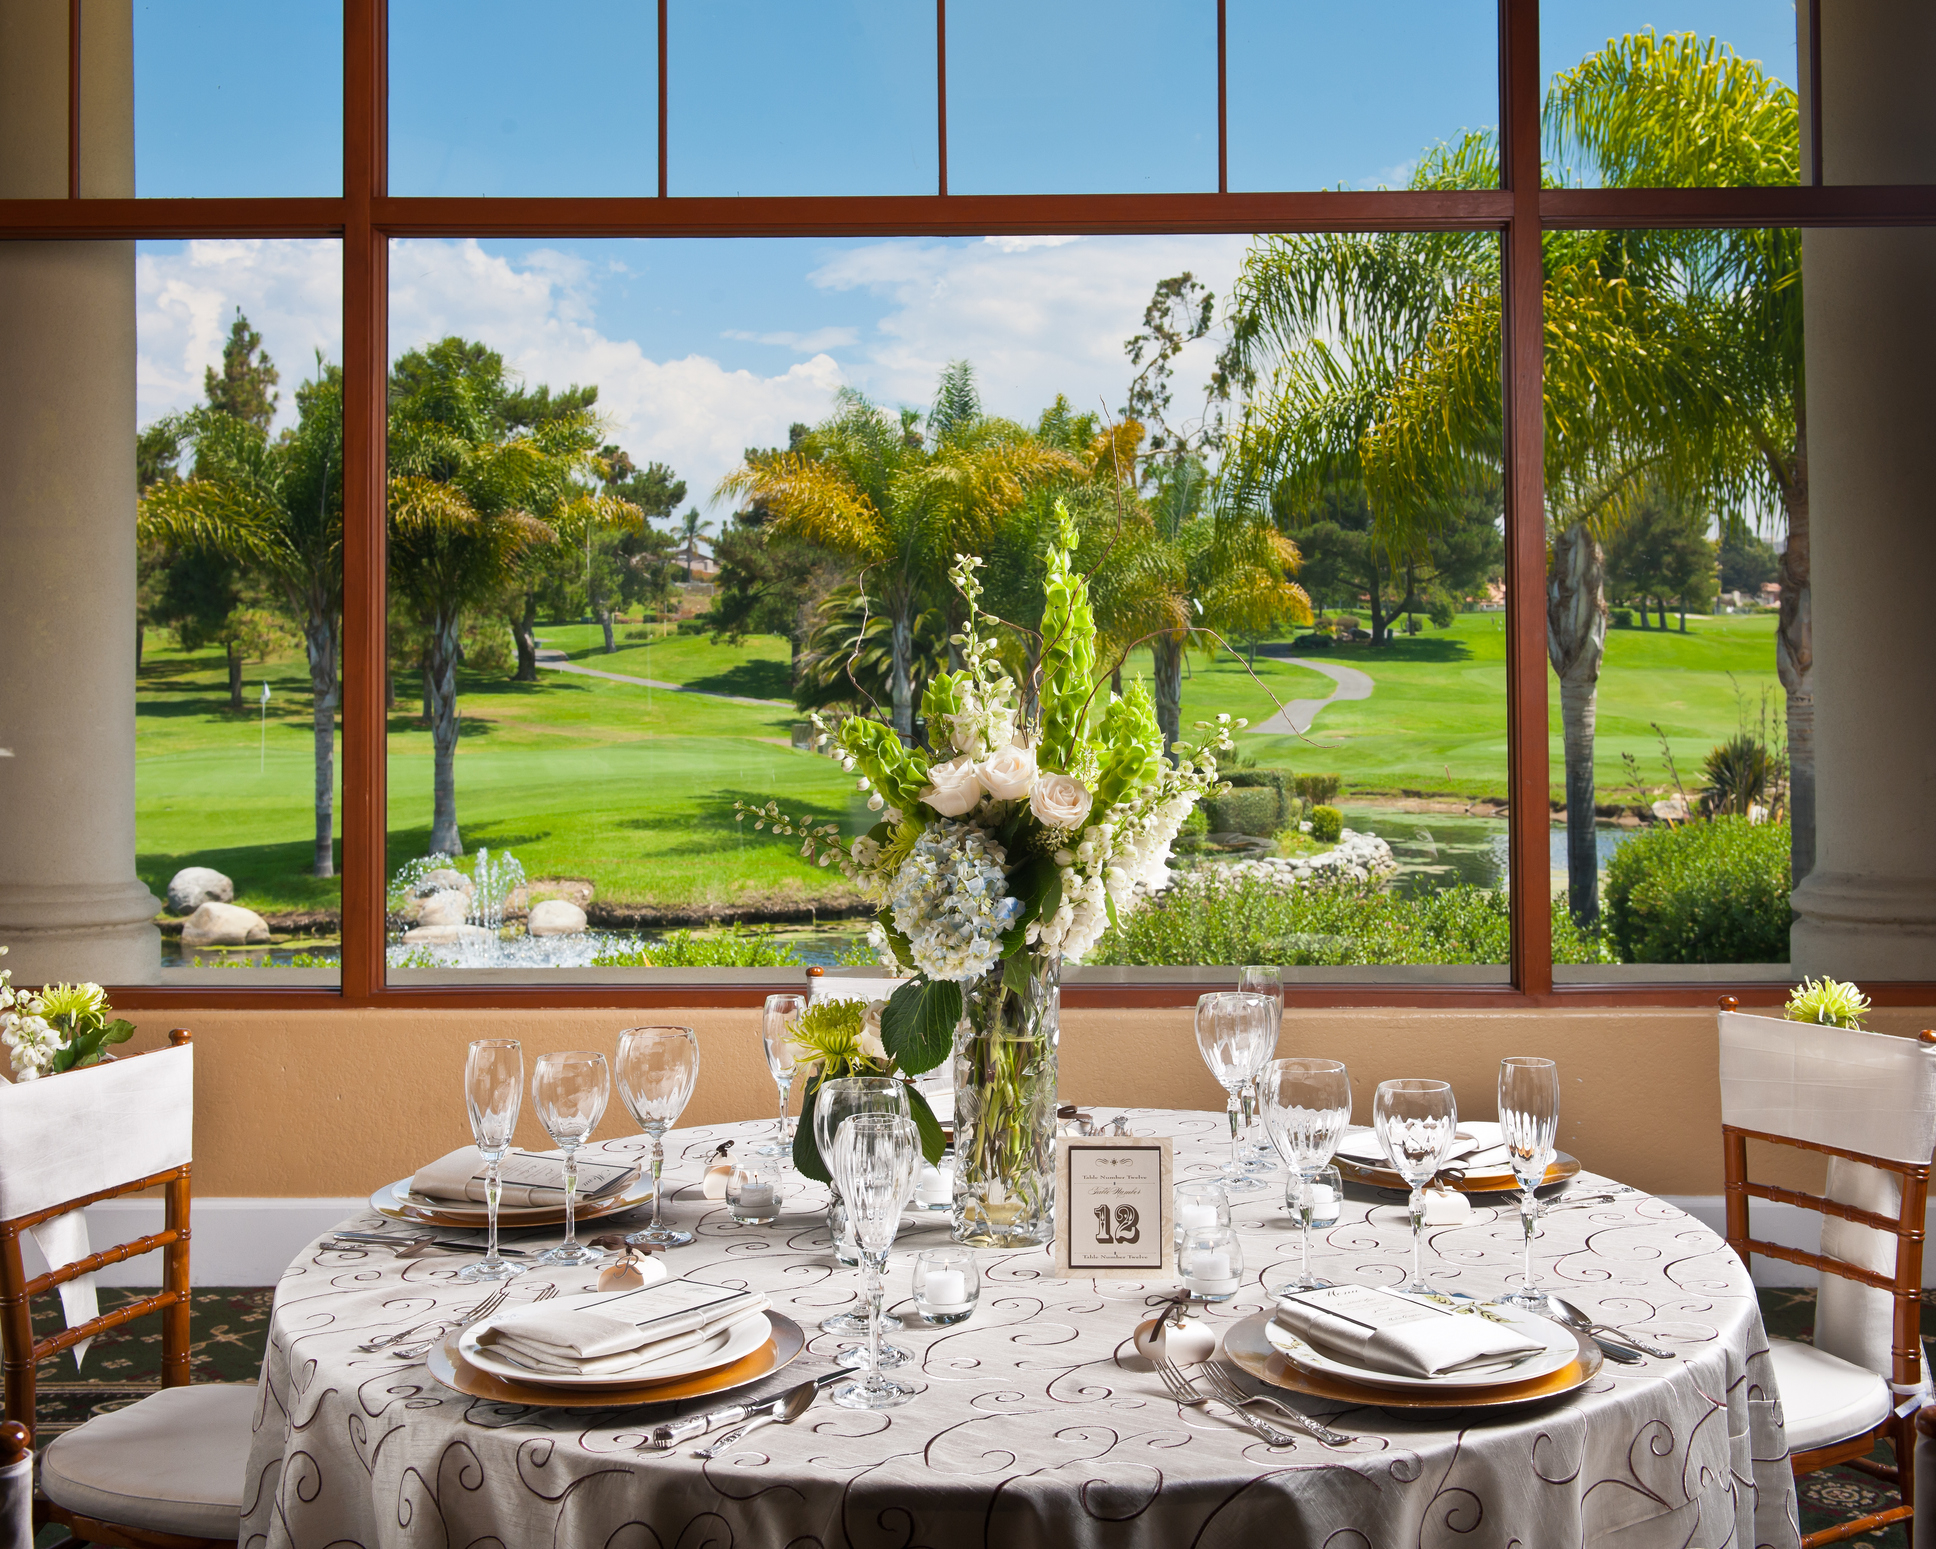 set up table in a country club with a golf course seen through the windows